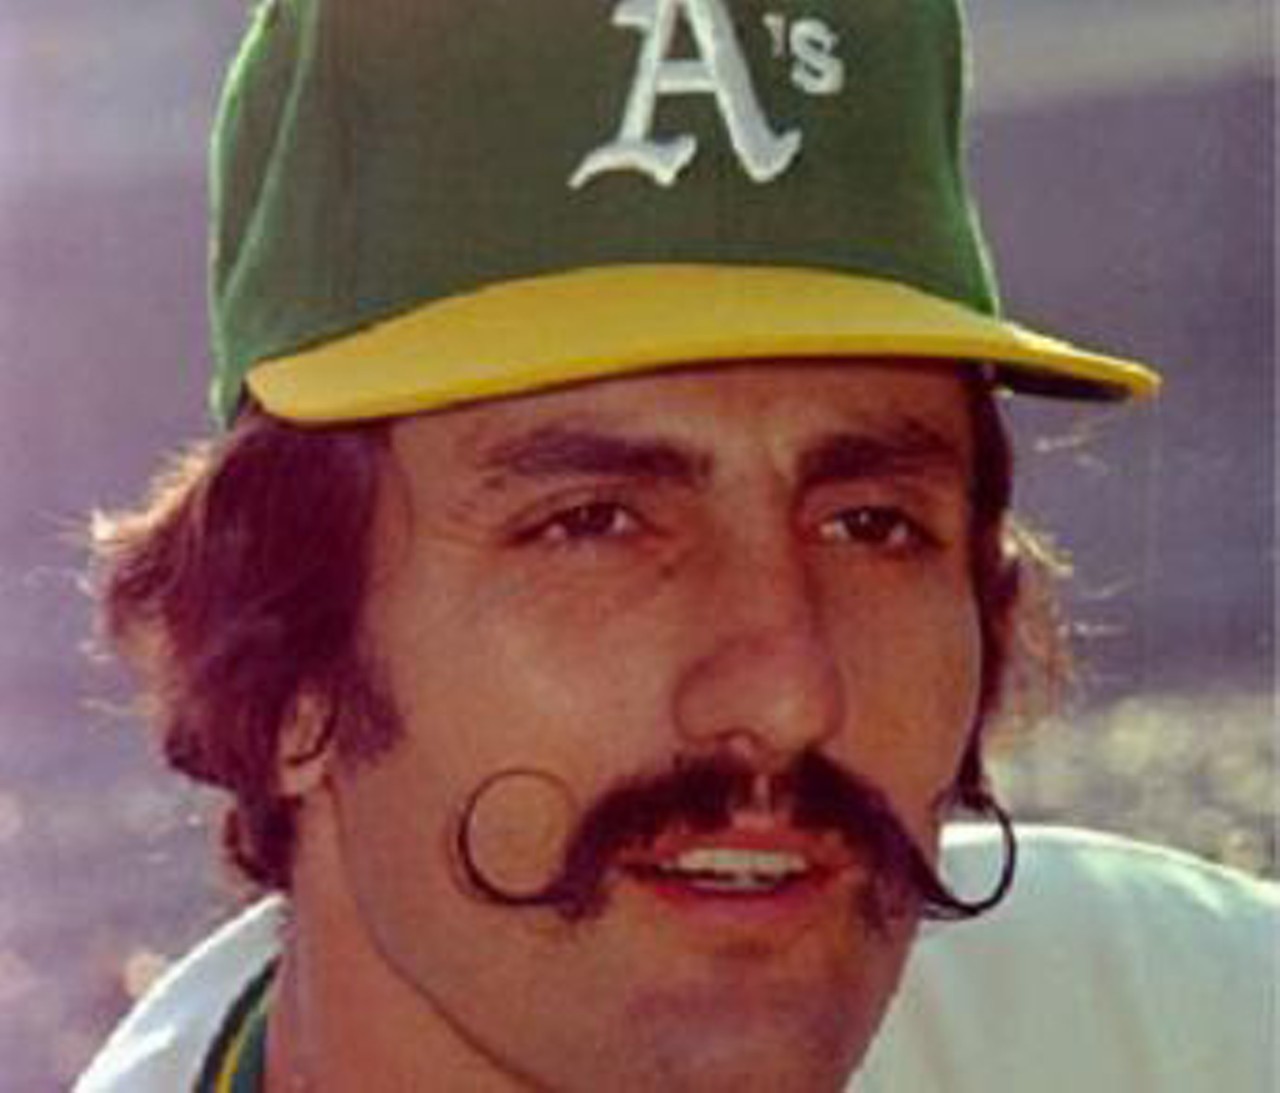 1. Rollie Fingers
The mustache is most often the providence of the closer, and thus it is fitting that the greatest 'stache of all belonged to a man who made finishing games his business. 
There is really nothing I can say about Rollie Fingers and his handlebar that hasn't been said already, a thousand times before. Both are legends. That's all that you need to know.